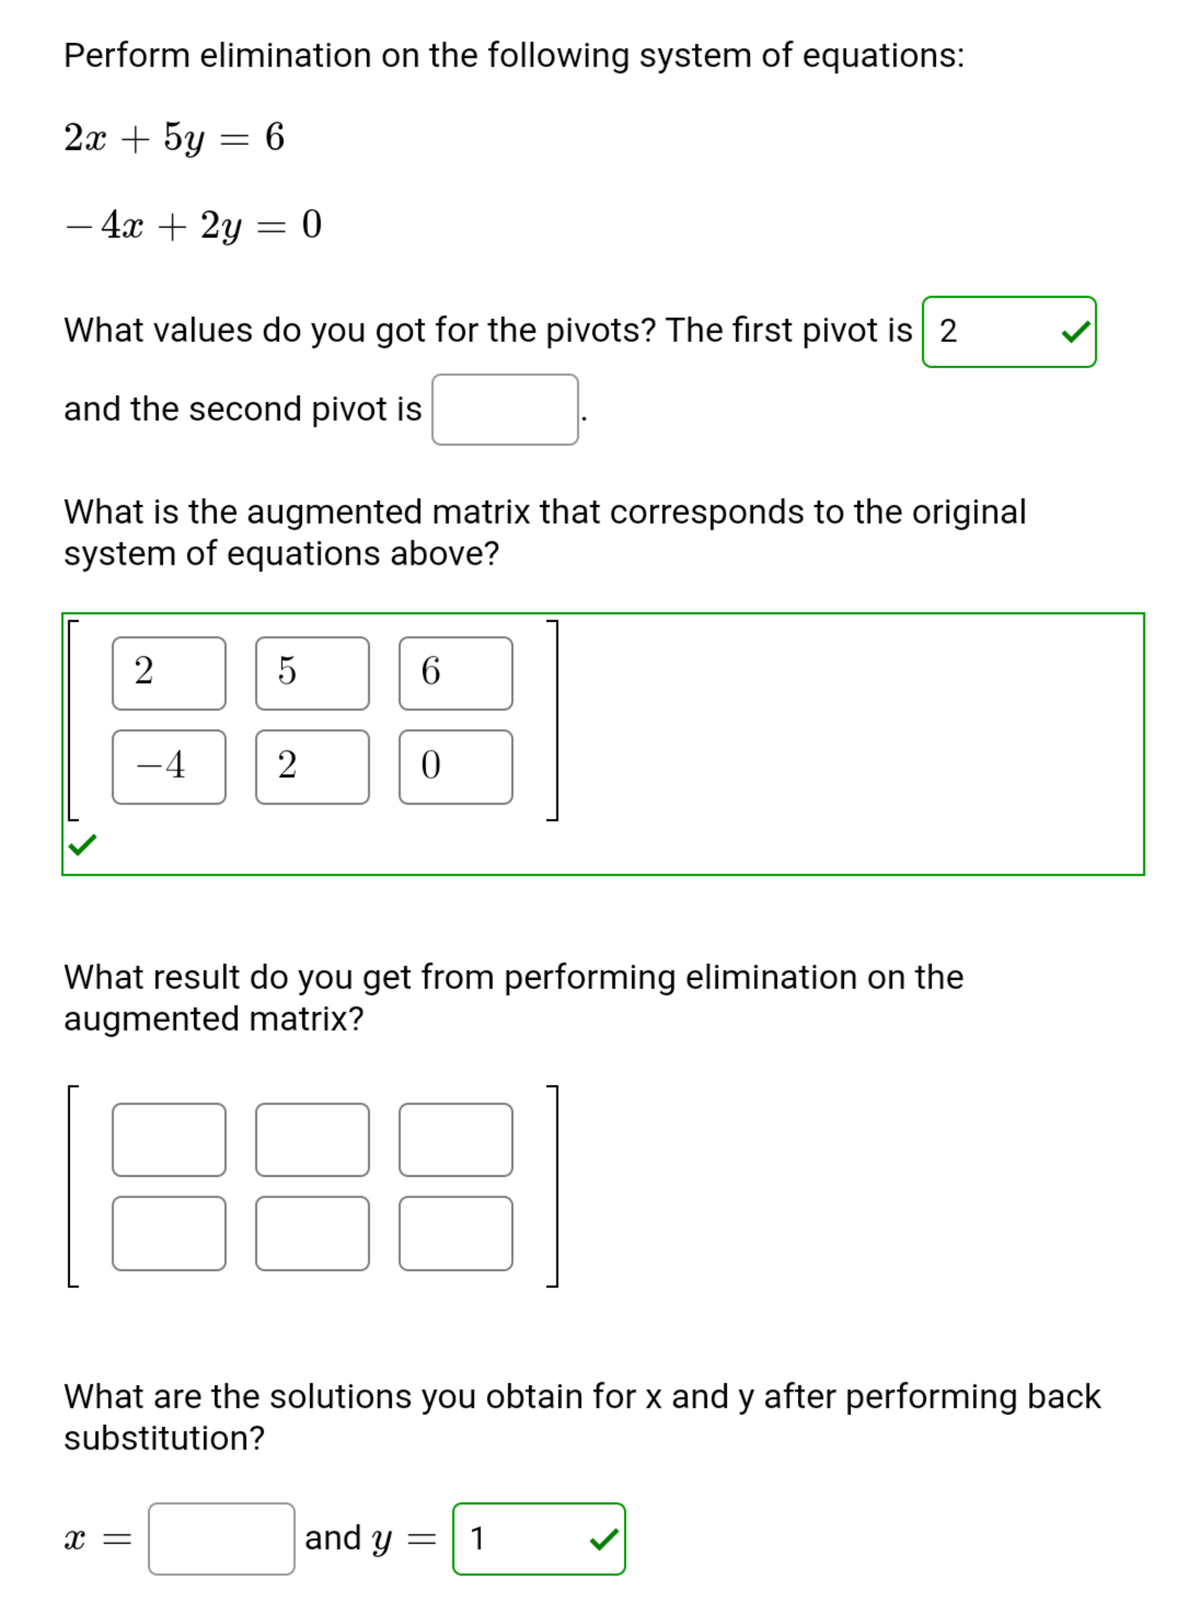 Perform elimination on the following system of equations:
2х + 5y
- 4x + 2y = 0
-
What values do you got for the pivots? The first pivot is 2
and the second pivot is
What is the augmented matrix that corresponds to the original
system of equations above?
5
6.
-4
What result do you get from performing elimination on the
augmented matrix?
What are the solutions you obtain for x and y after performing back
substitution?
and y
1
X =
